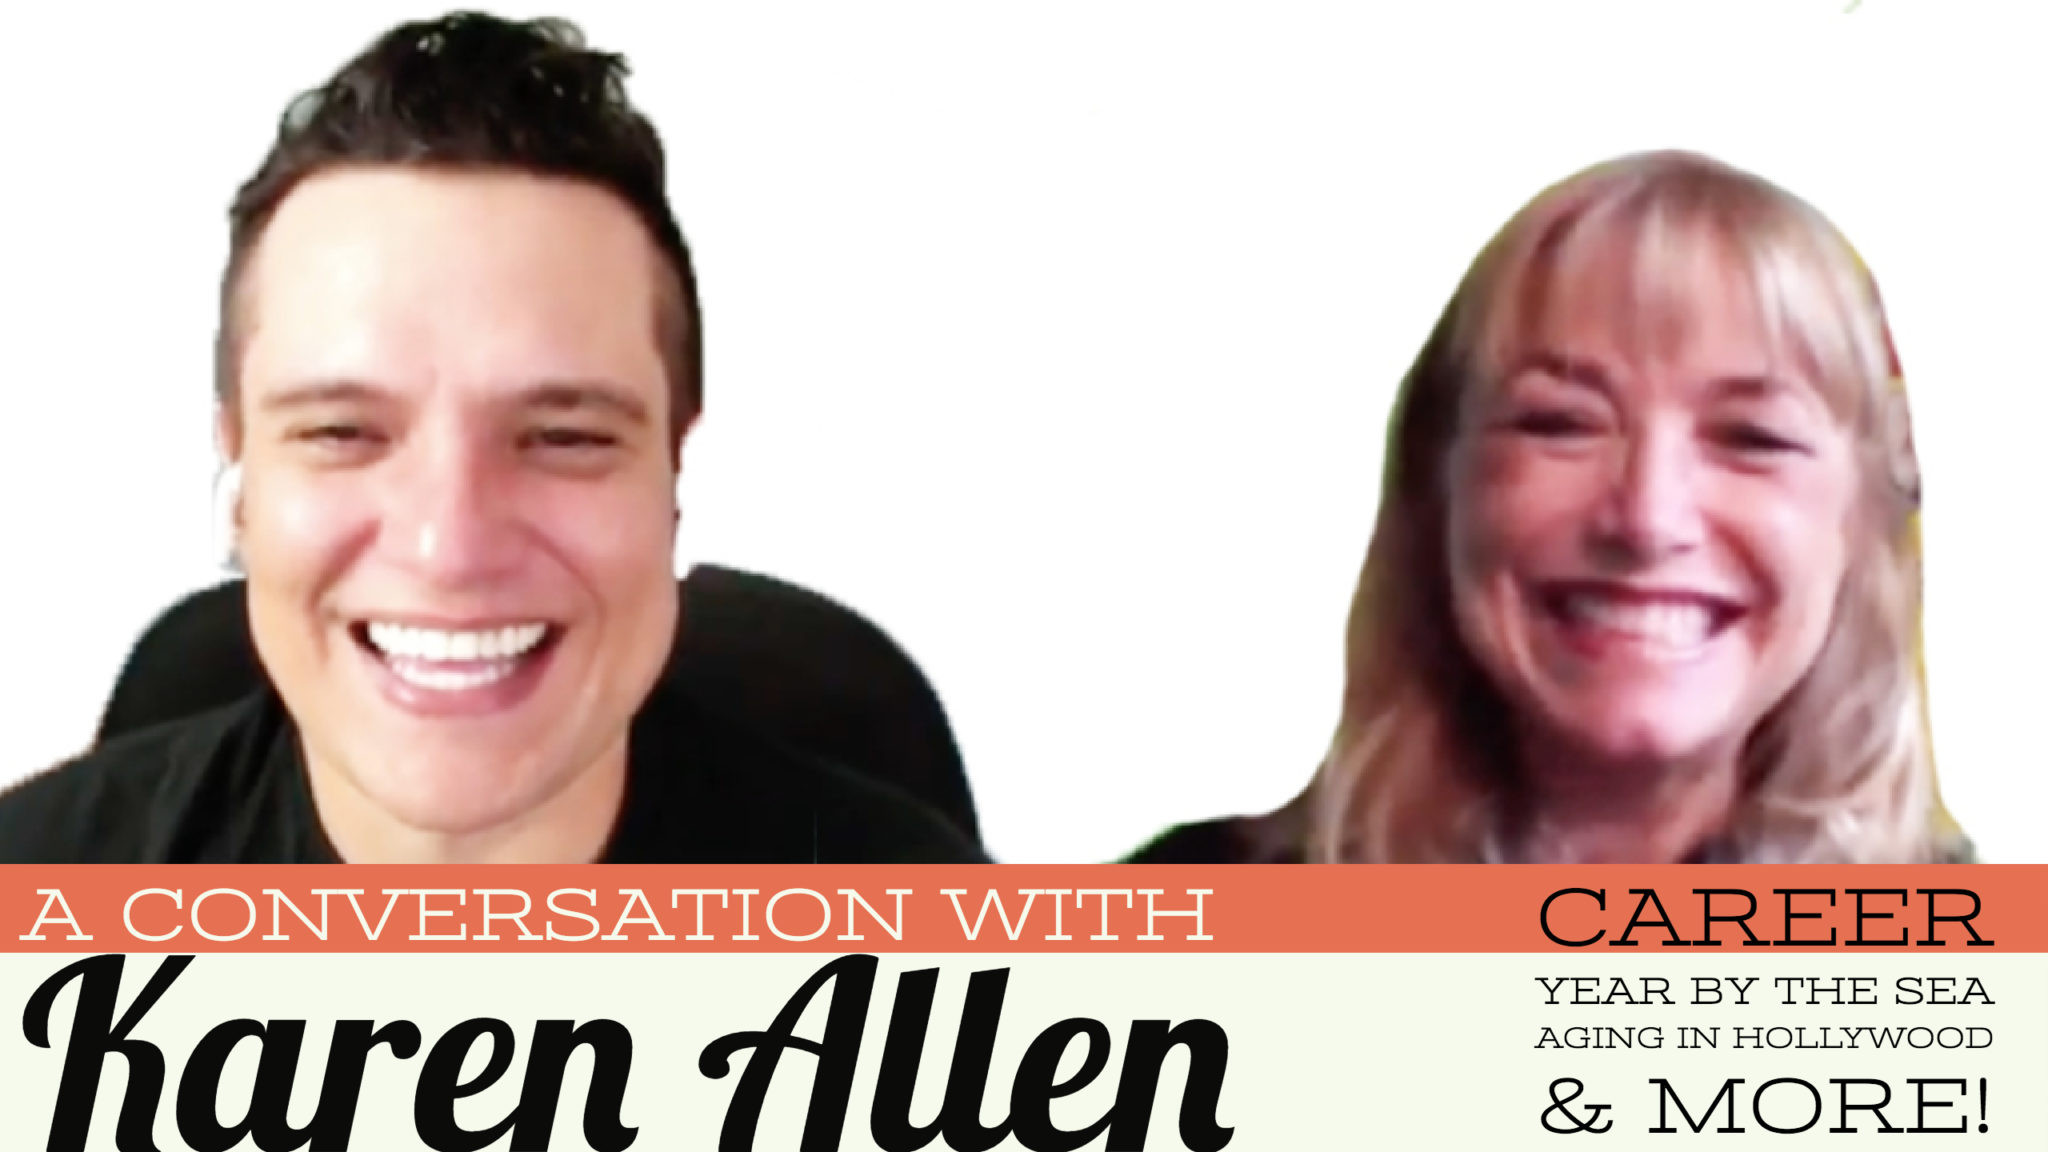 Film, tv and stage star Karen Allen discusses Year By The Sea and Indiana Jones with Kyle McMahon